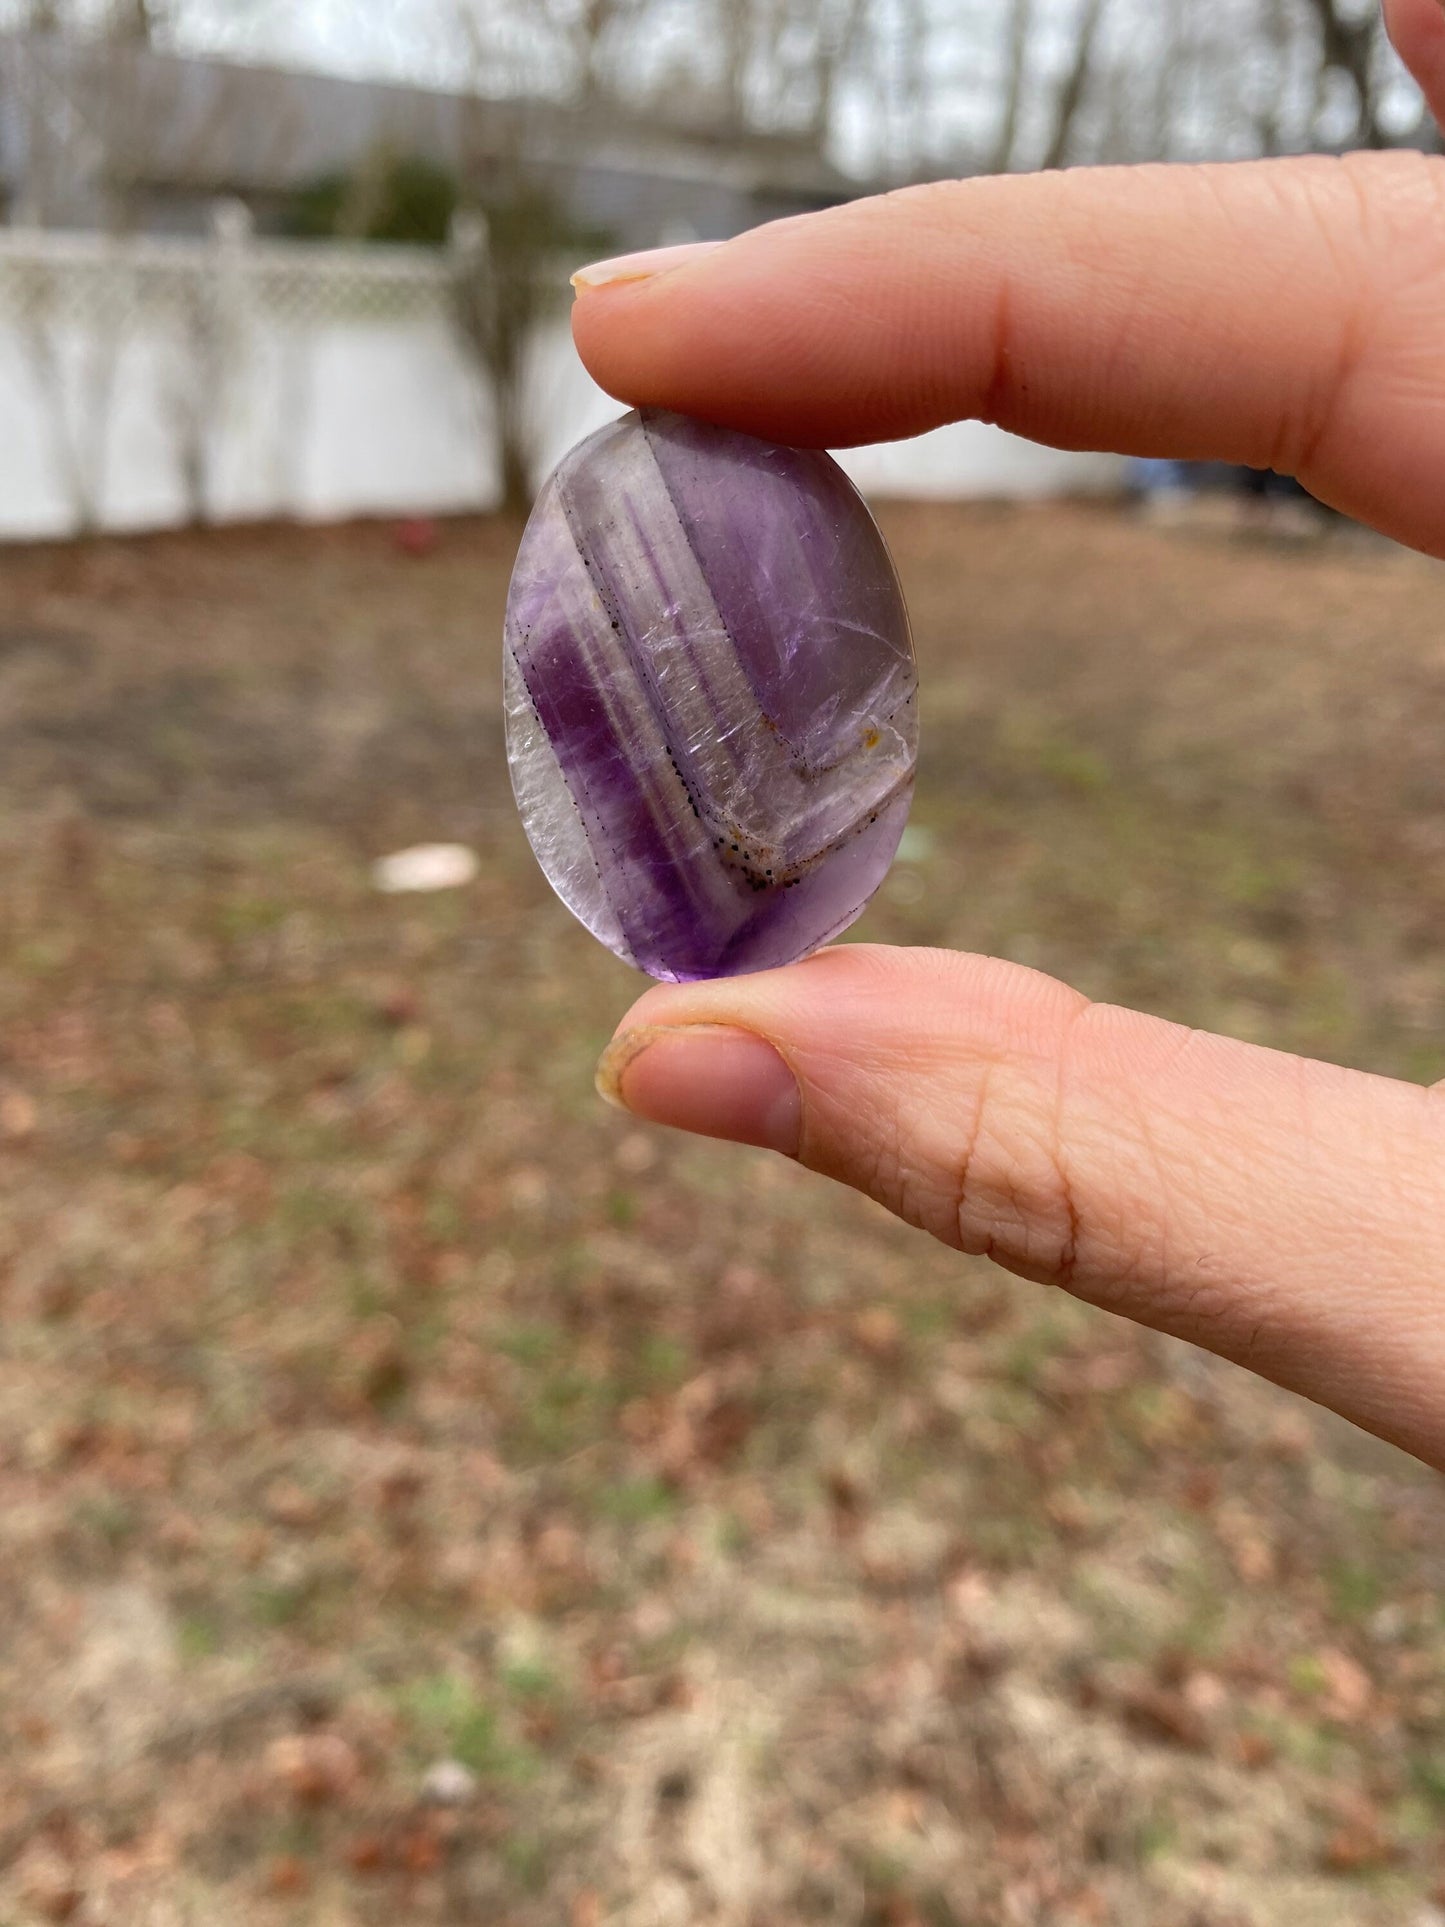 Amethyst Happy Stone / Worry Stone / Natural Crystal / Relaxing / Spiritual / Calming / Intuition Stone